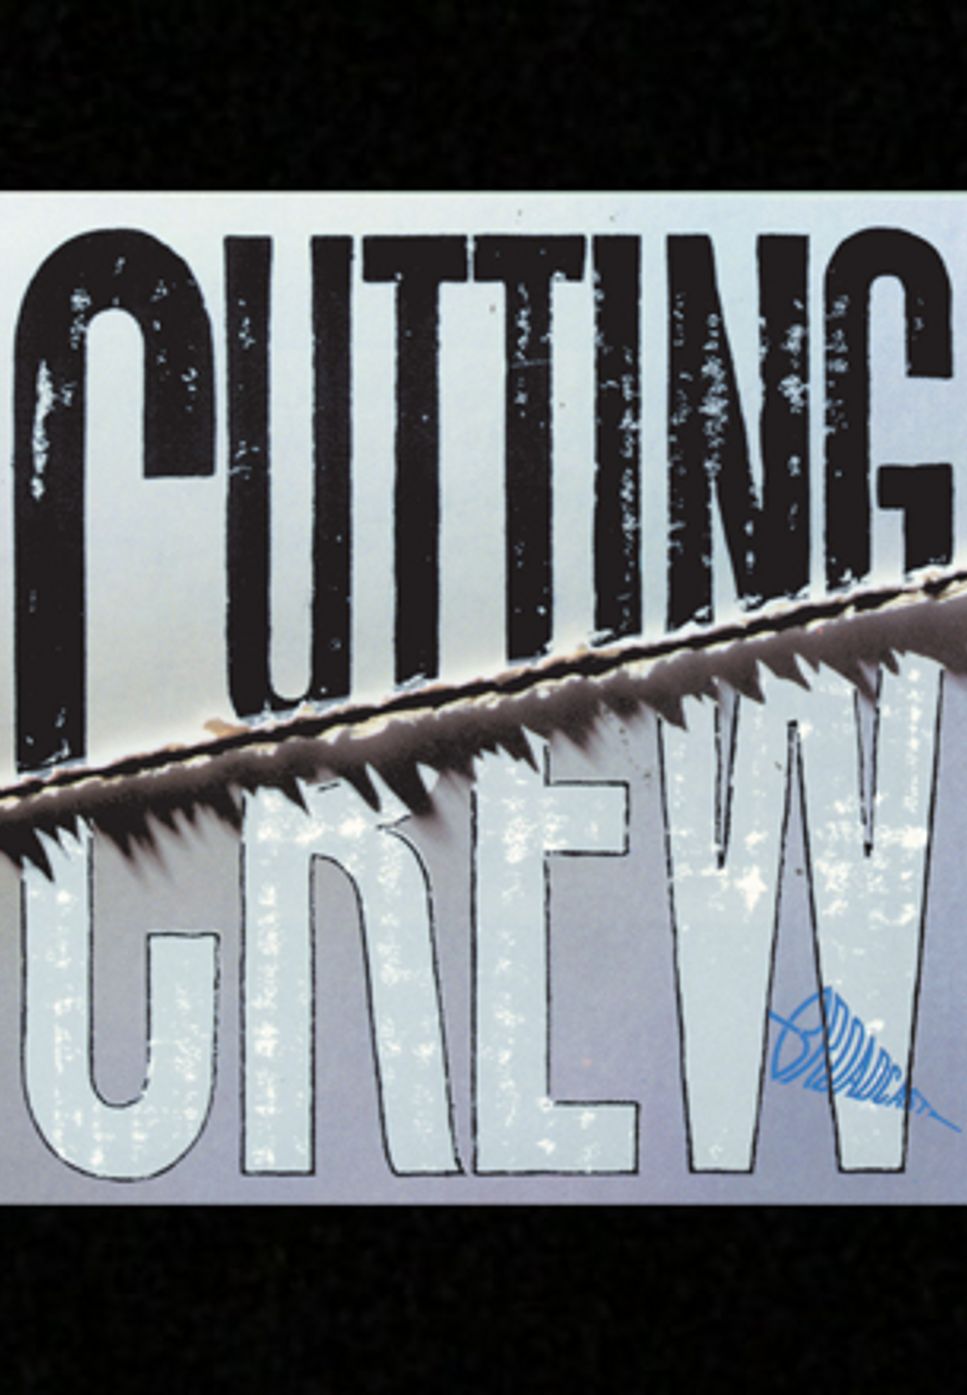 Cutting Crew - (I Just) Died in Your Arms by Ayman Bou